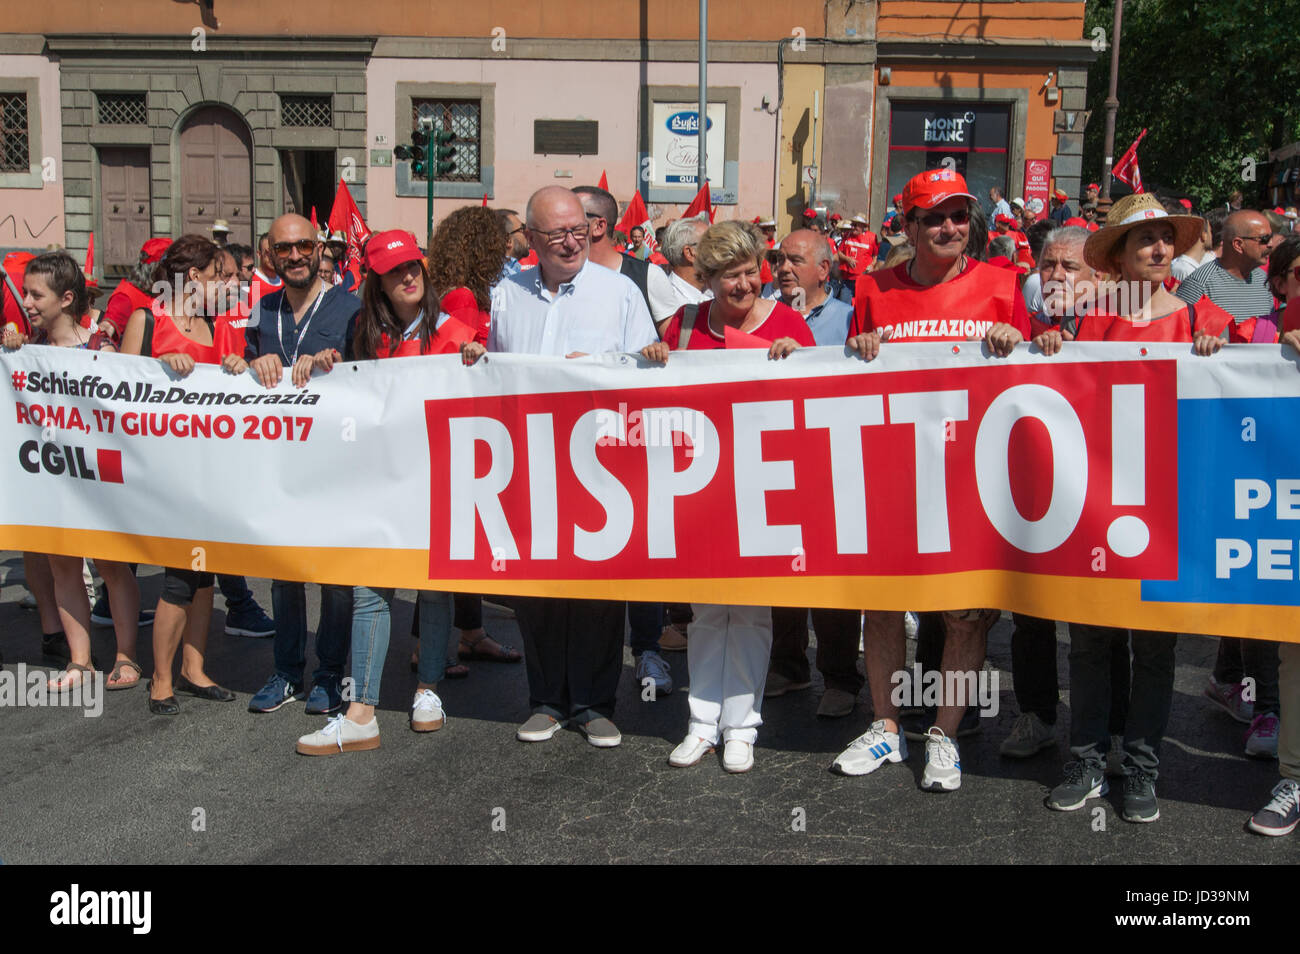 The workers of the main Italian trade union have manifested themselves in Rome to demand more Respect, more Work, more Democracy. Political and trade union representatives also attended the event, including former secretary of CGIL Guglielmo Epifani, national secretary of Italian Left Nicola Fratoianni and the National Metalworker (FIOM) secretary Maurizio Landini. The event ended with the intervention of the national secretary Susanna Camusso The workers of the main Italian trade union have manifested themselves in Rome to demand more Respect, more Work, more Democracy. Political and trade un Stock Photo